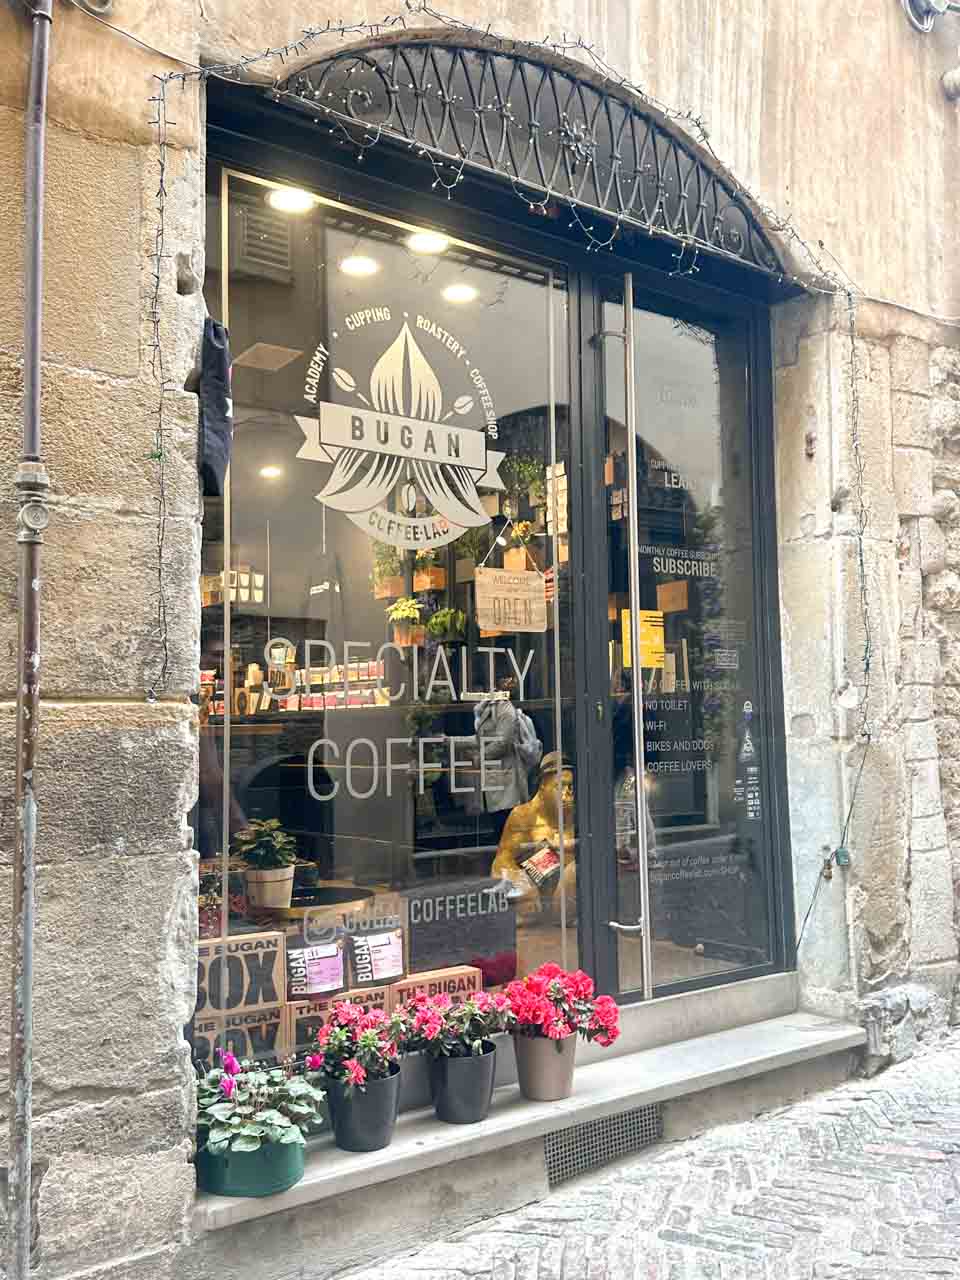 The storefront of Bugan Coffee Lab, a specialty coffee shop in Bergamo, Italy